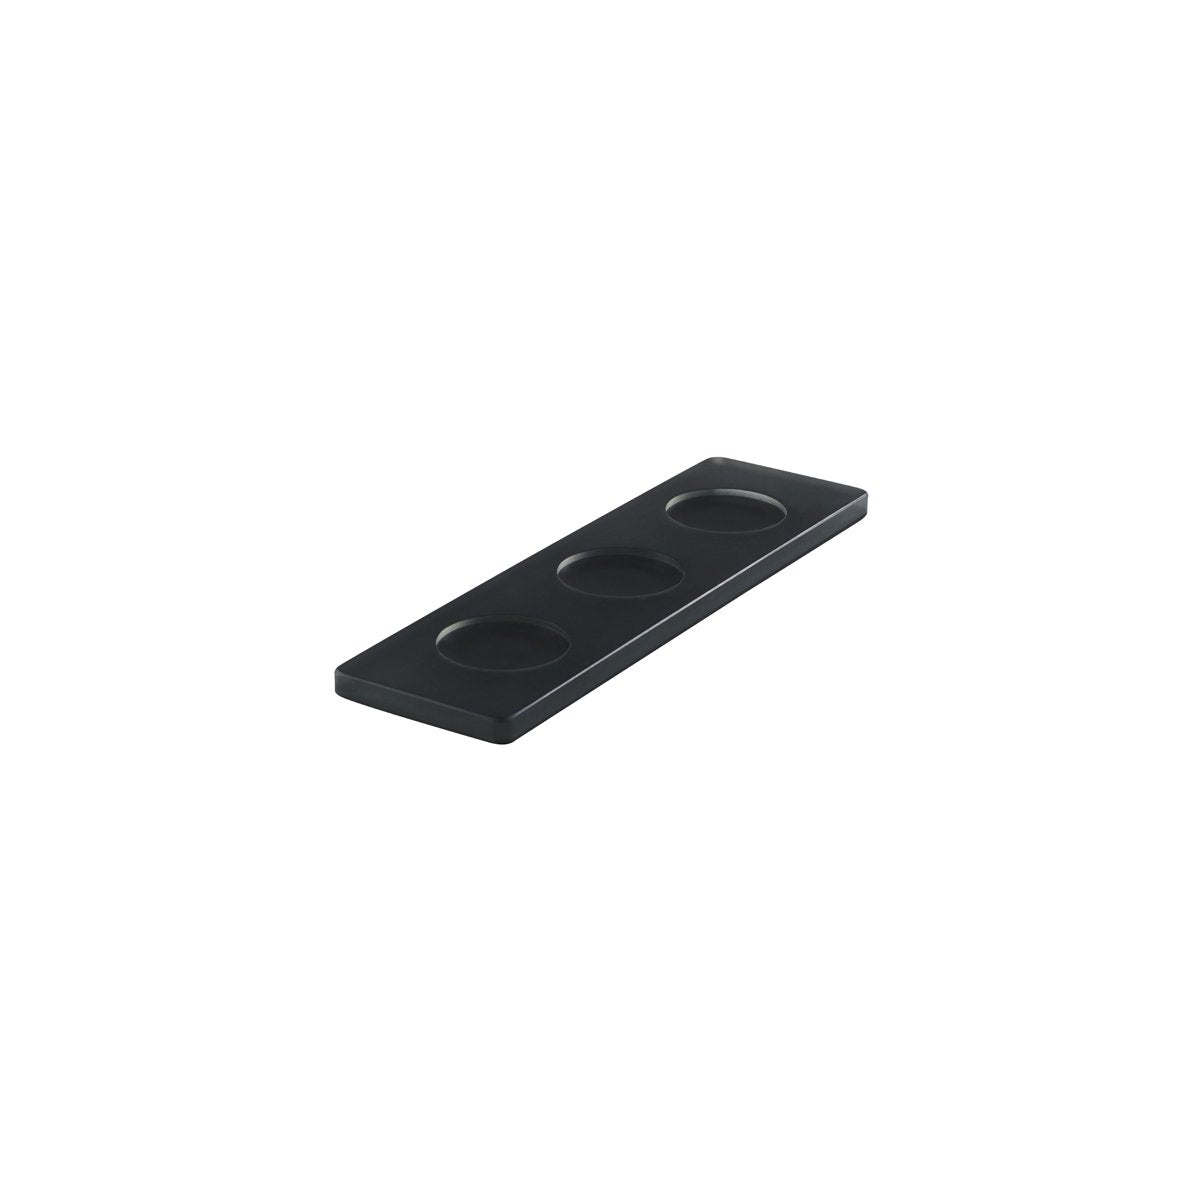 MLP118957 Mealplak Tray With 3 Indents Anthracite 245x70x10mm Tomkin Australia Hospitality Supplies